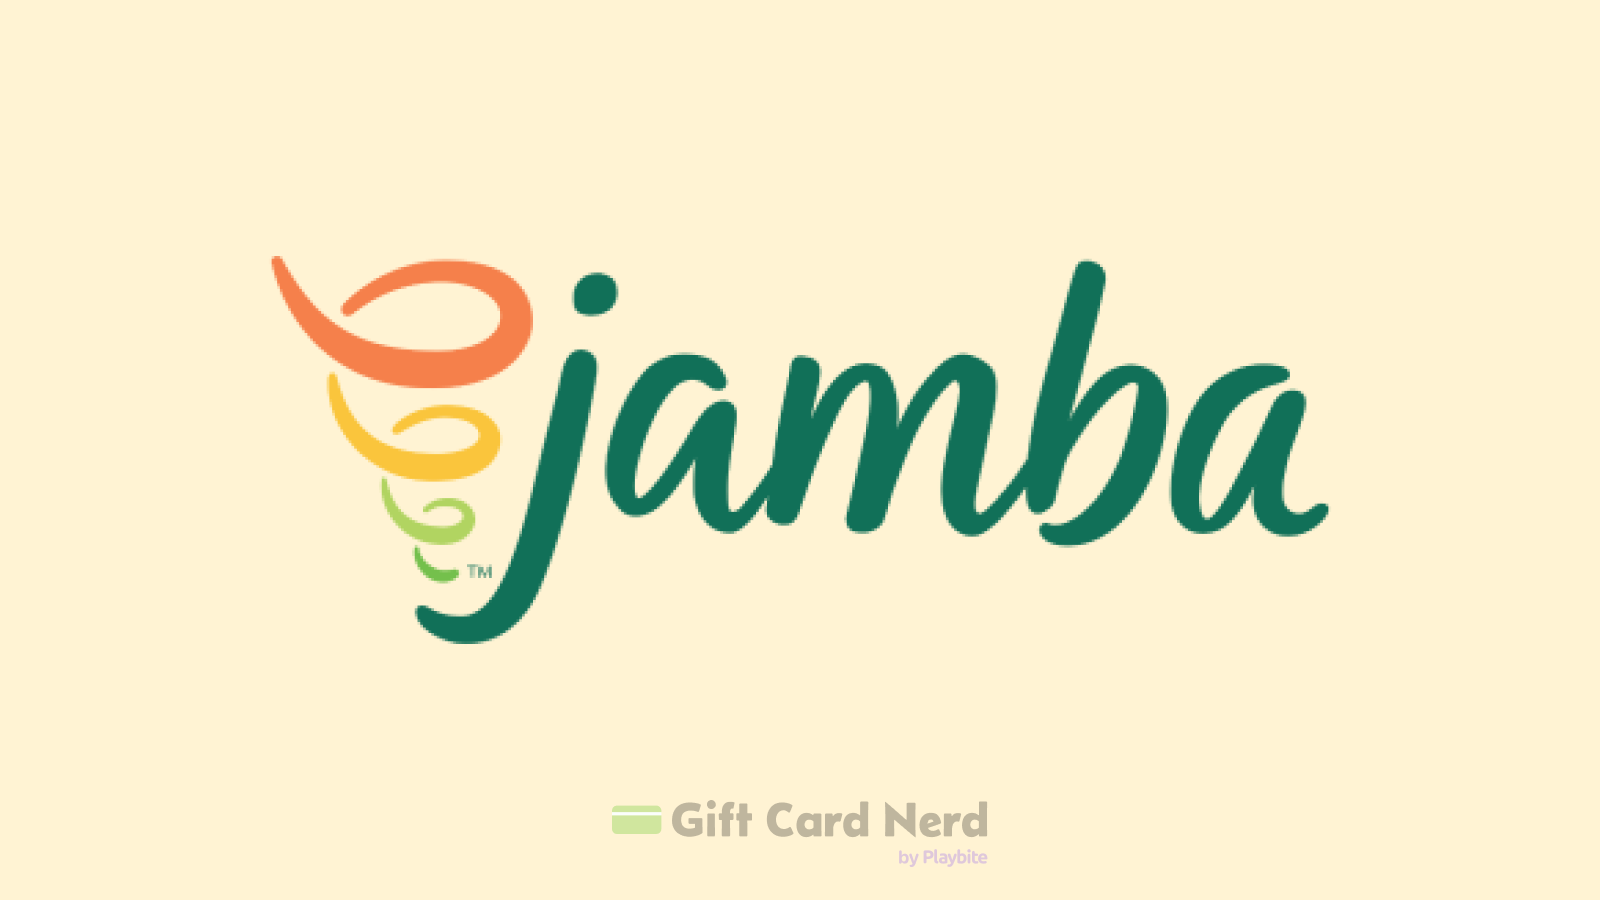 Can I Use a Jamba Juice Gift Card on Cash App?